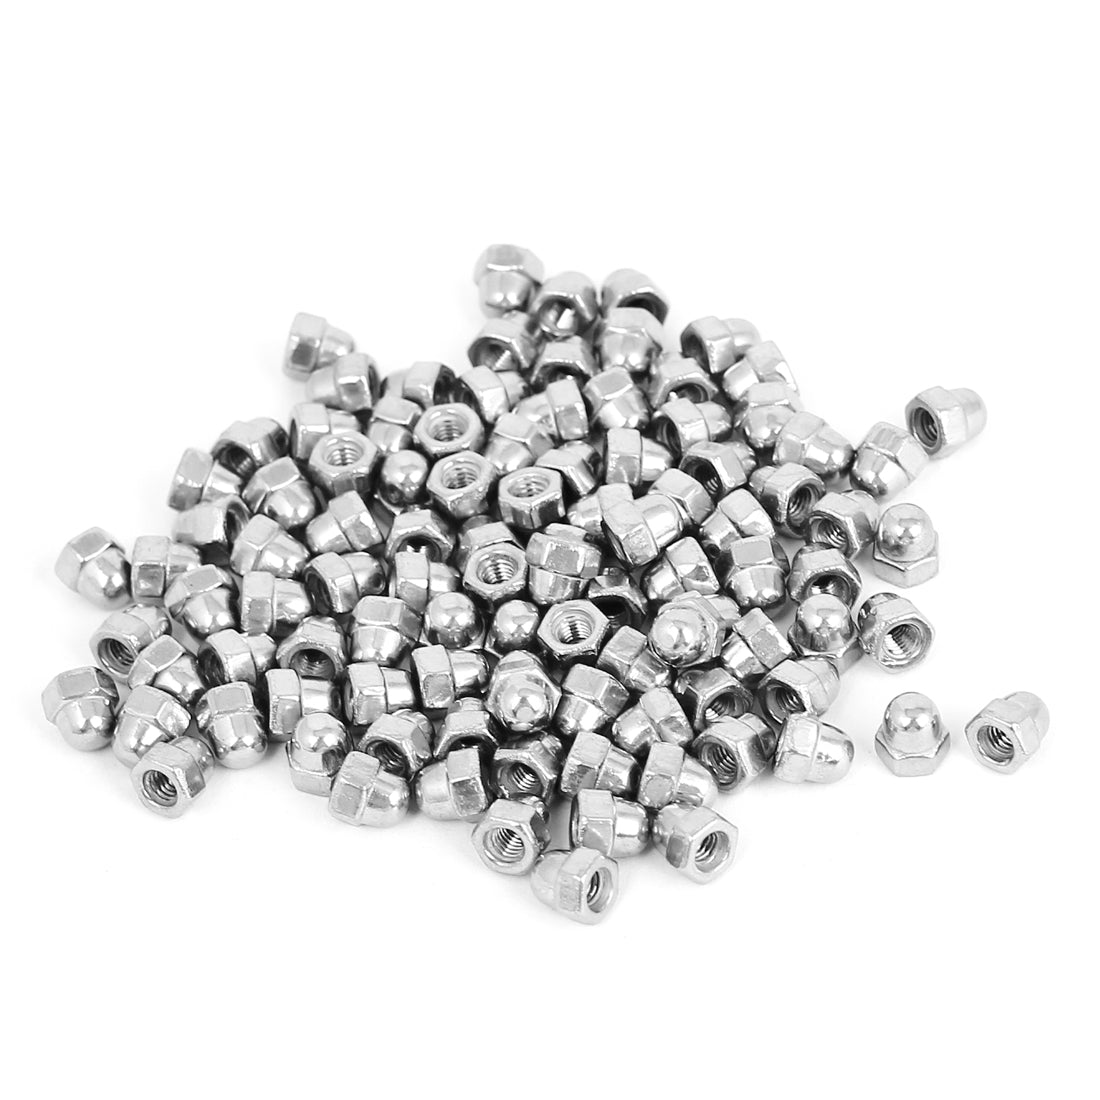 Uxcell Uxcell M3 304 Stainless Steel Dome Head Cap Acorn Hex Nuts Silver Tone 100pcs